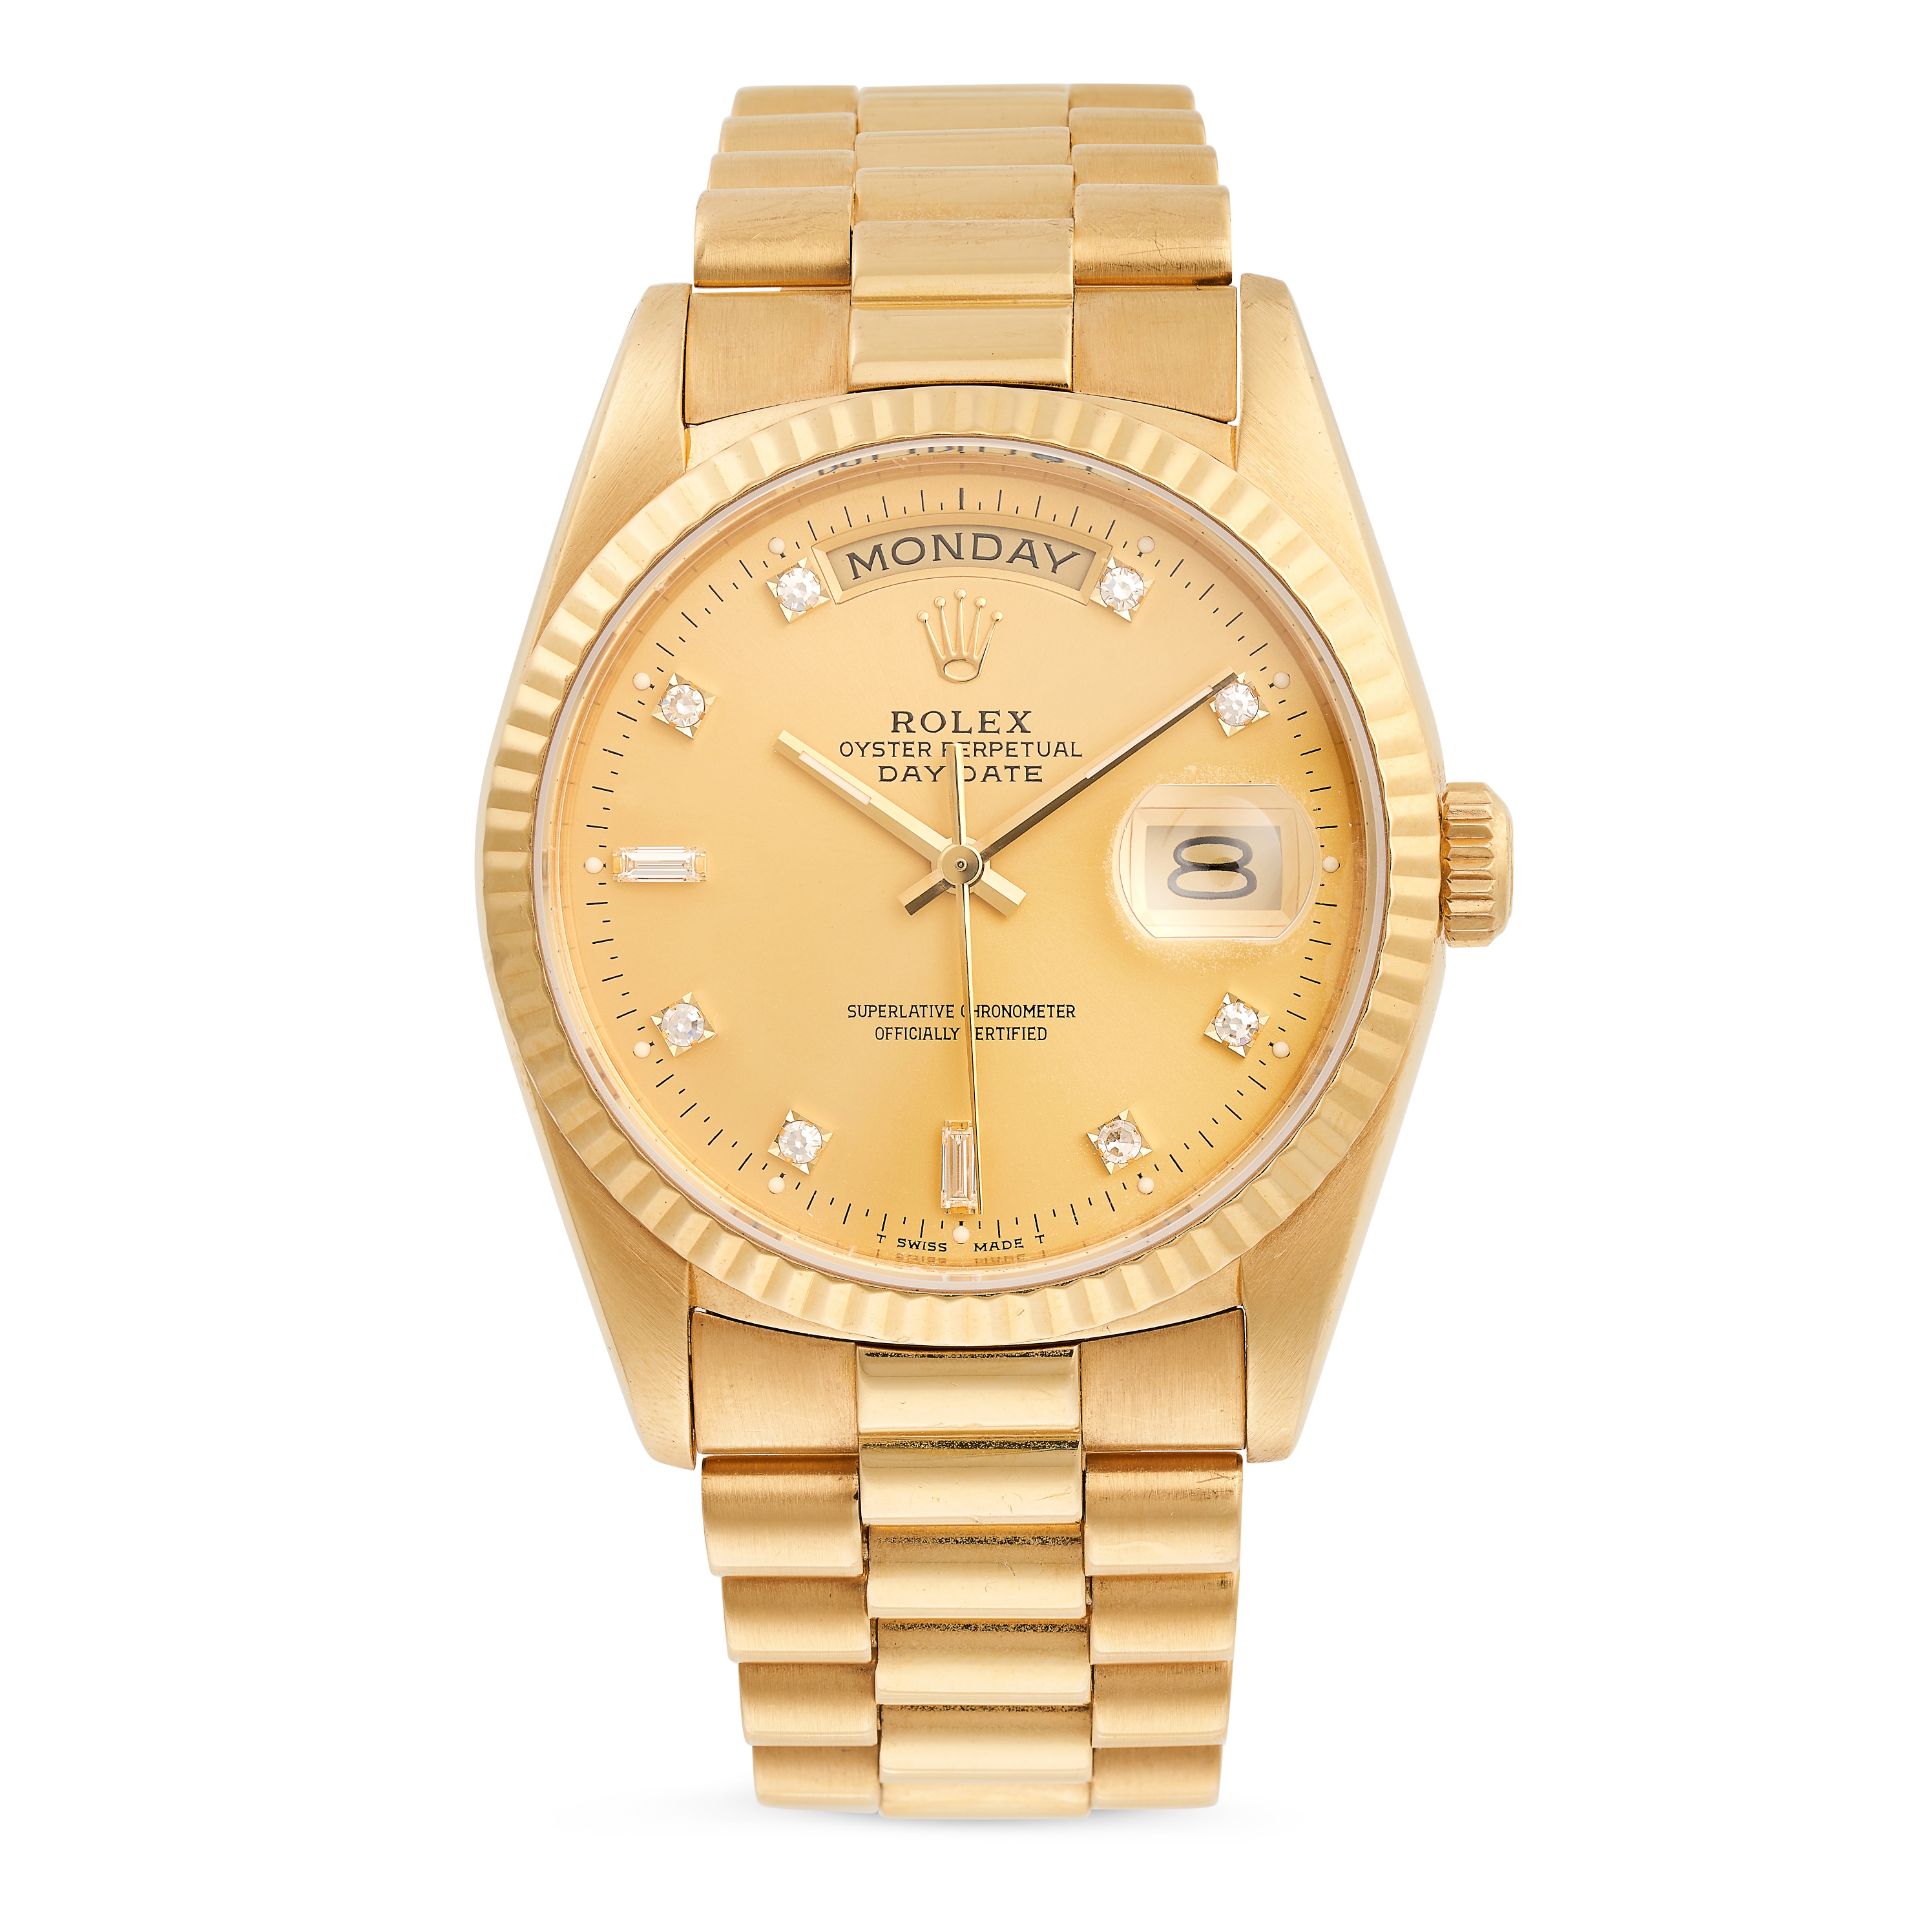 ROLEX, A PRESIDENTIAL GOLD AND DIAMOND ROLEX OYSTER PERPETUAL DAY date, REF. 18238, 1989 in 18ct - Bild 2 aus 6